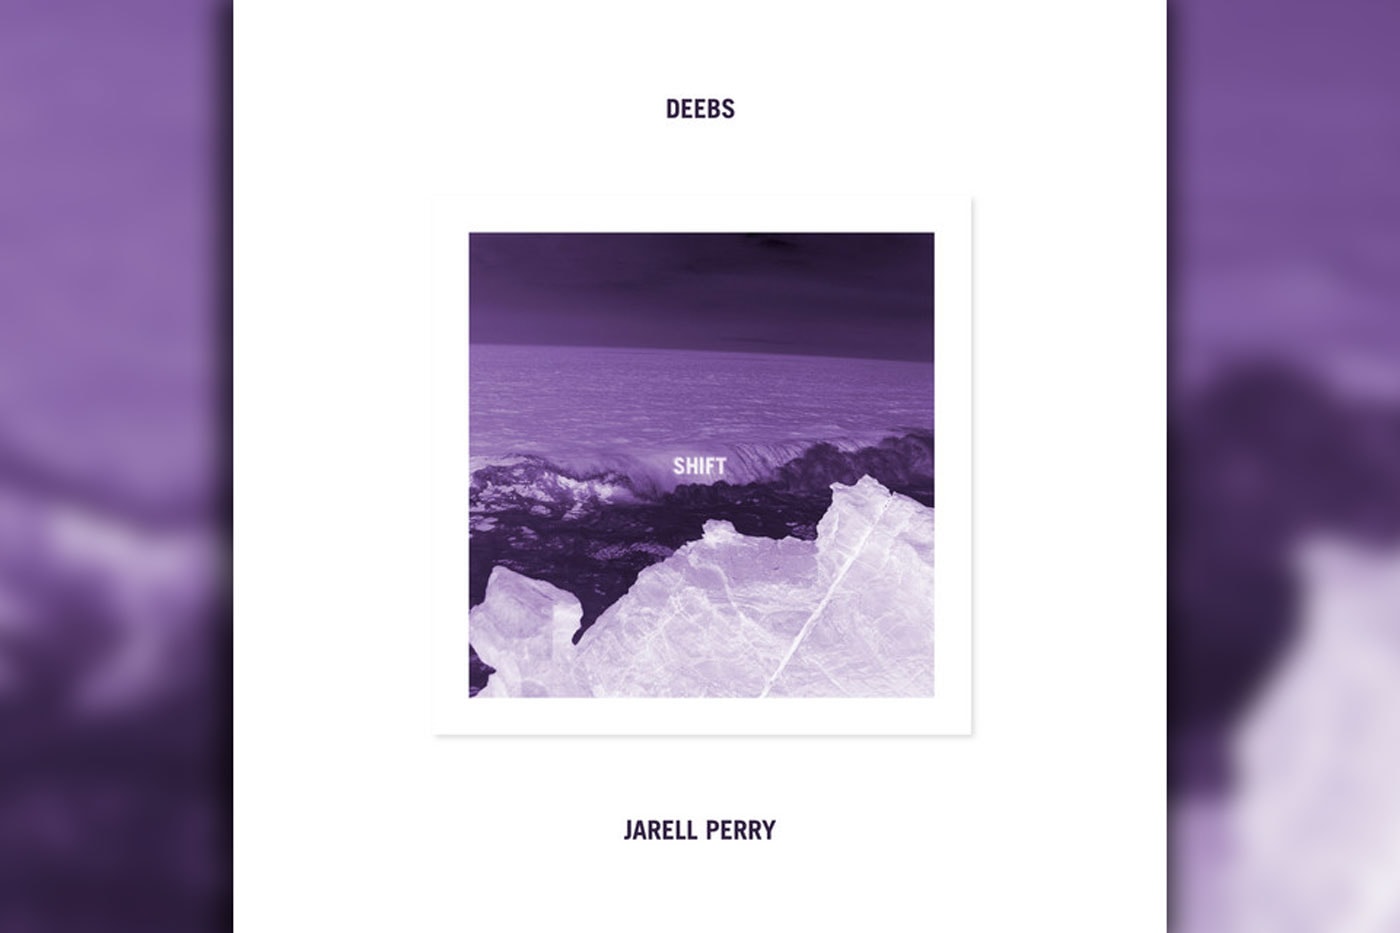 Jarell Perry & Deebs Release & Discuss Their Video for "Relapse"